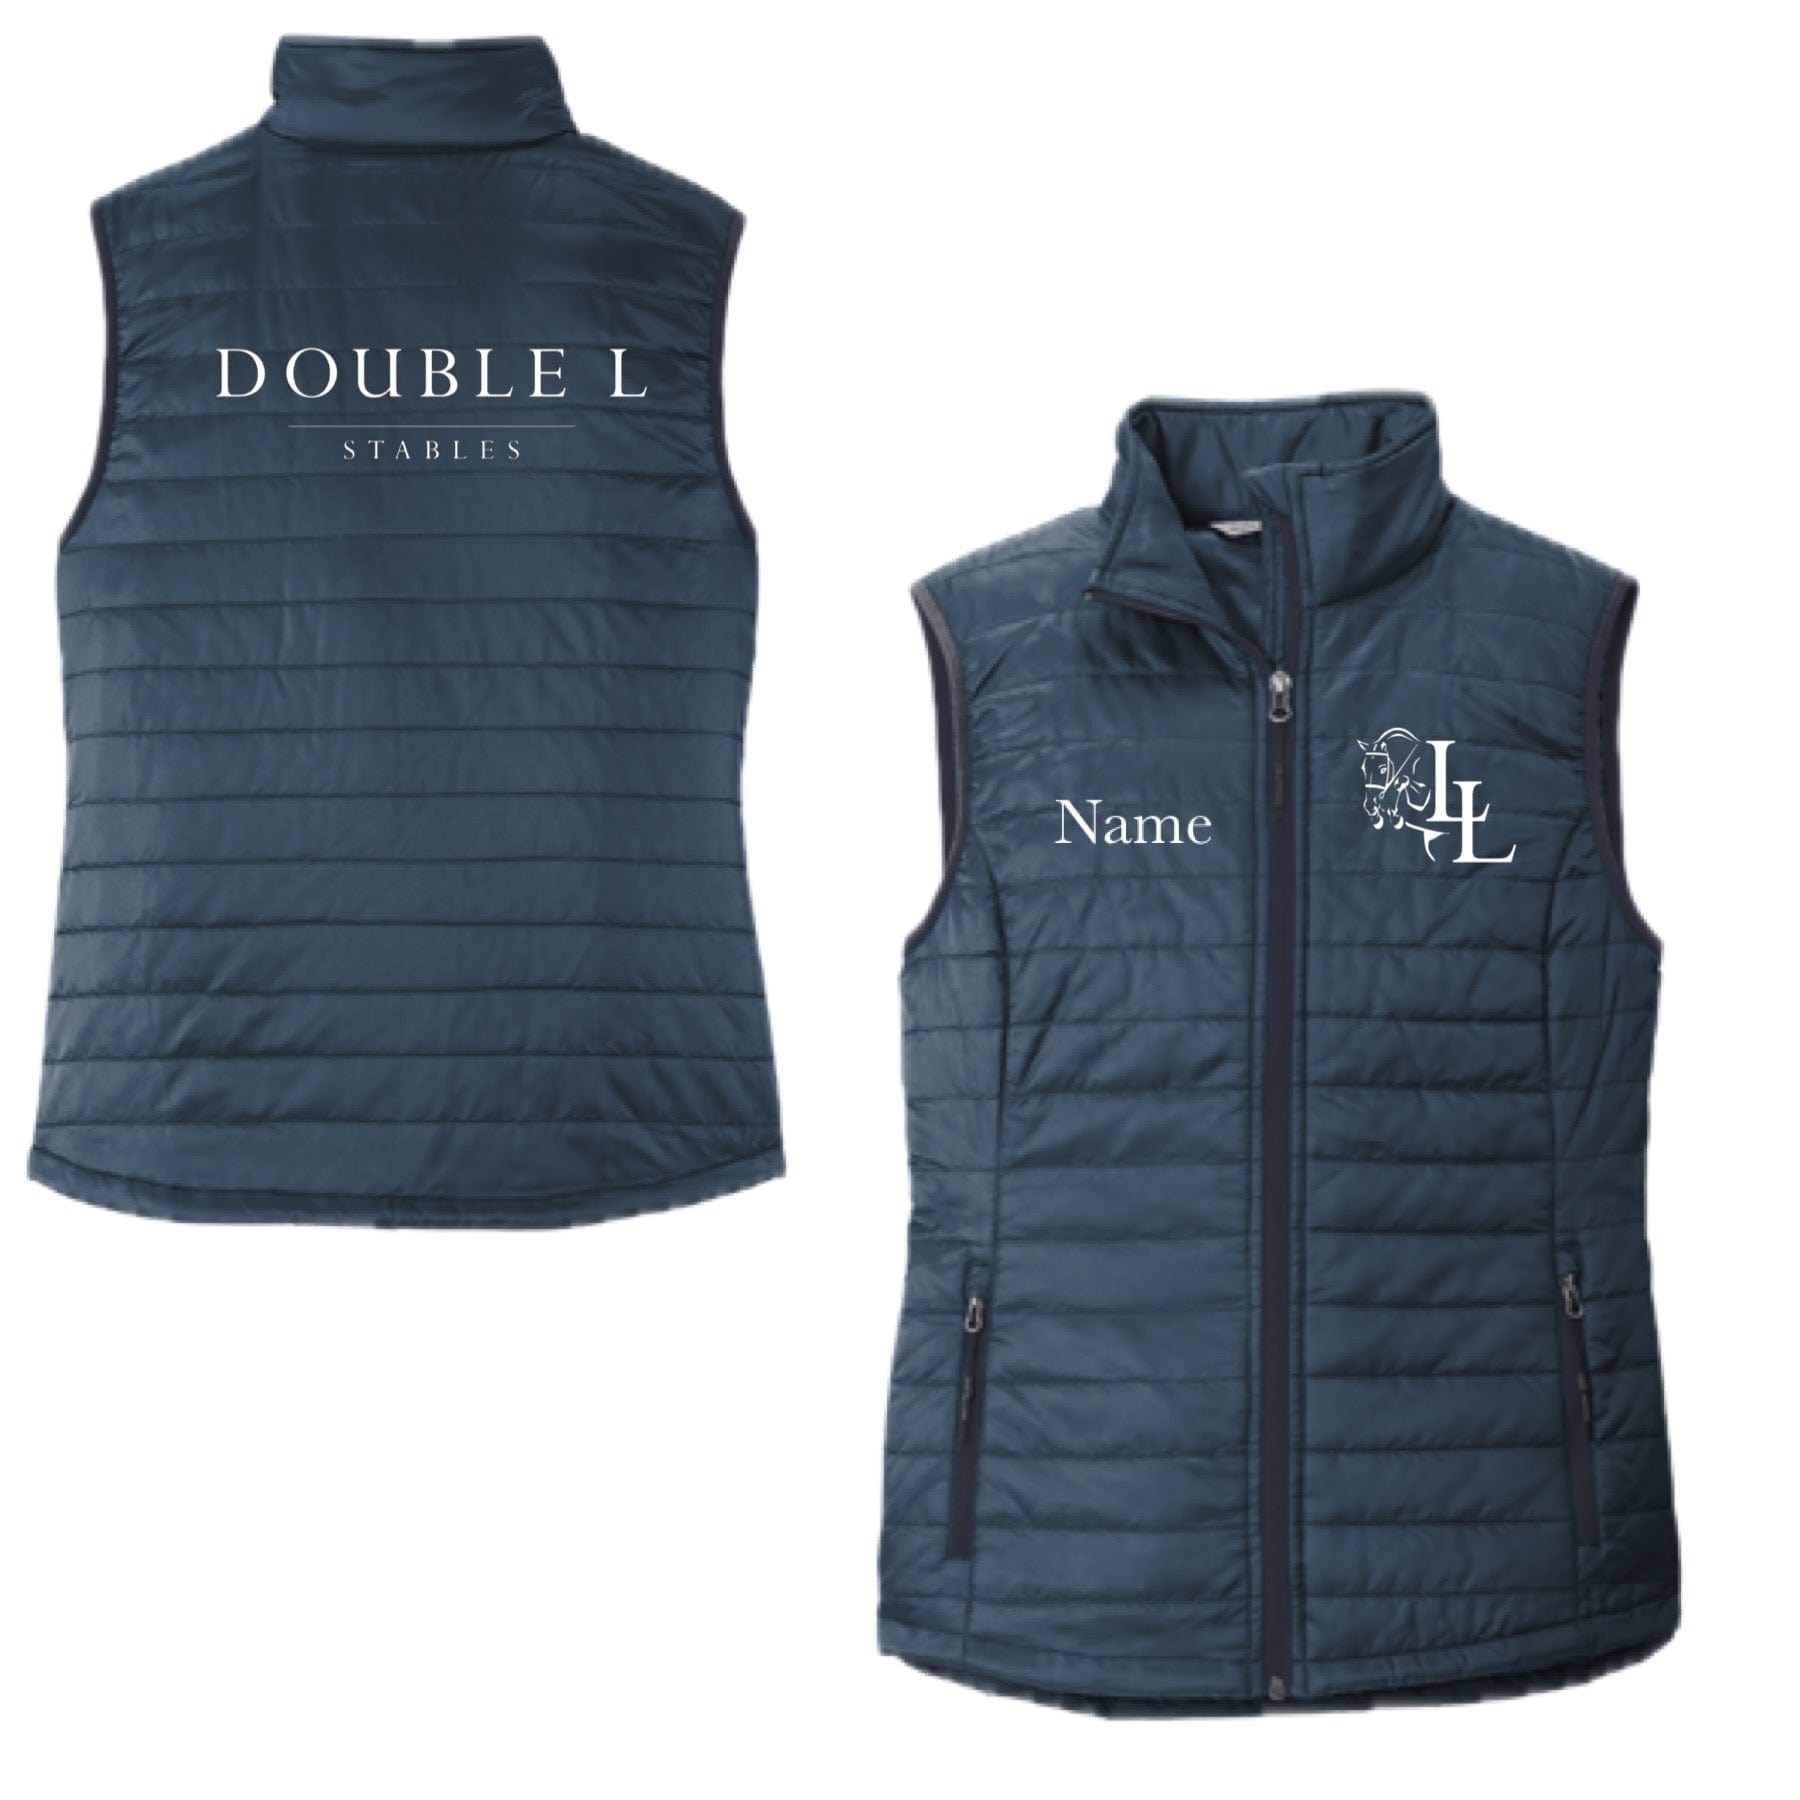 Equestrian Team Apparel Double L Stables Puffy Jacket and Vest equestrian team apparel online tack store mobile tack store custom farm apparel custom show stable clothing equestrian lifestyle horse show clothing riding clothes horses equestrian tack store